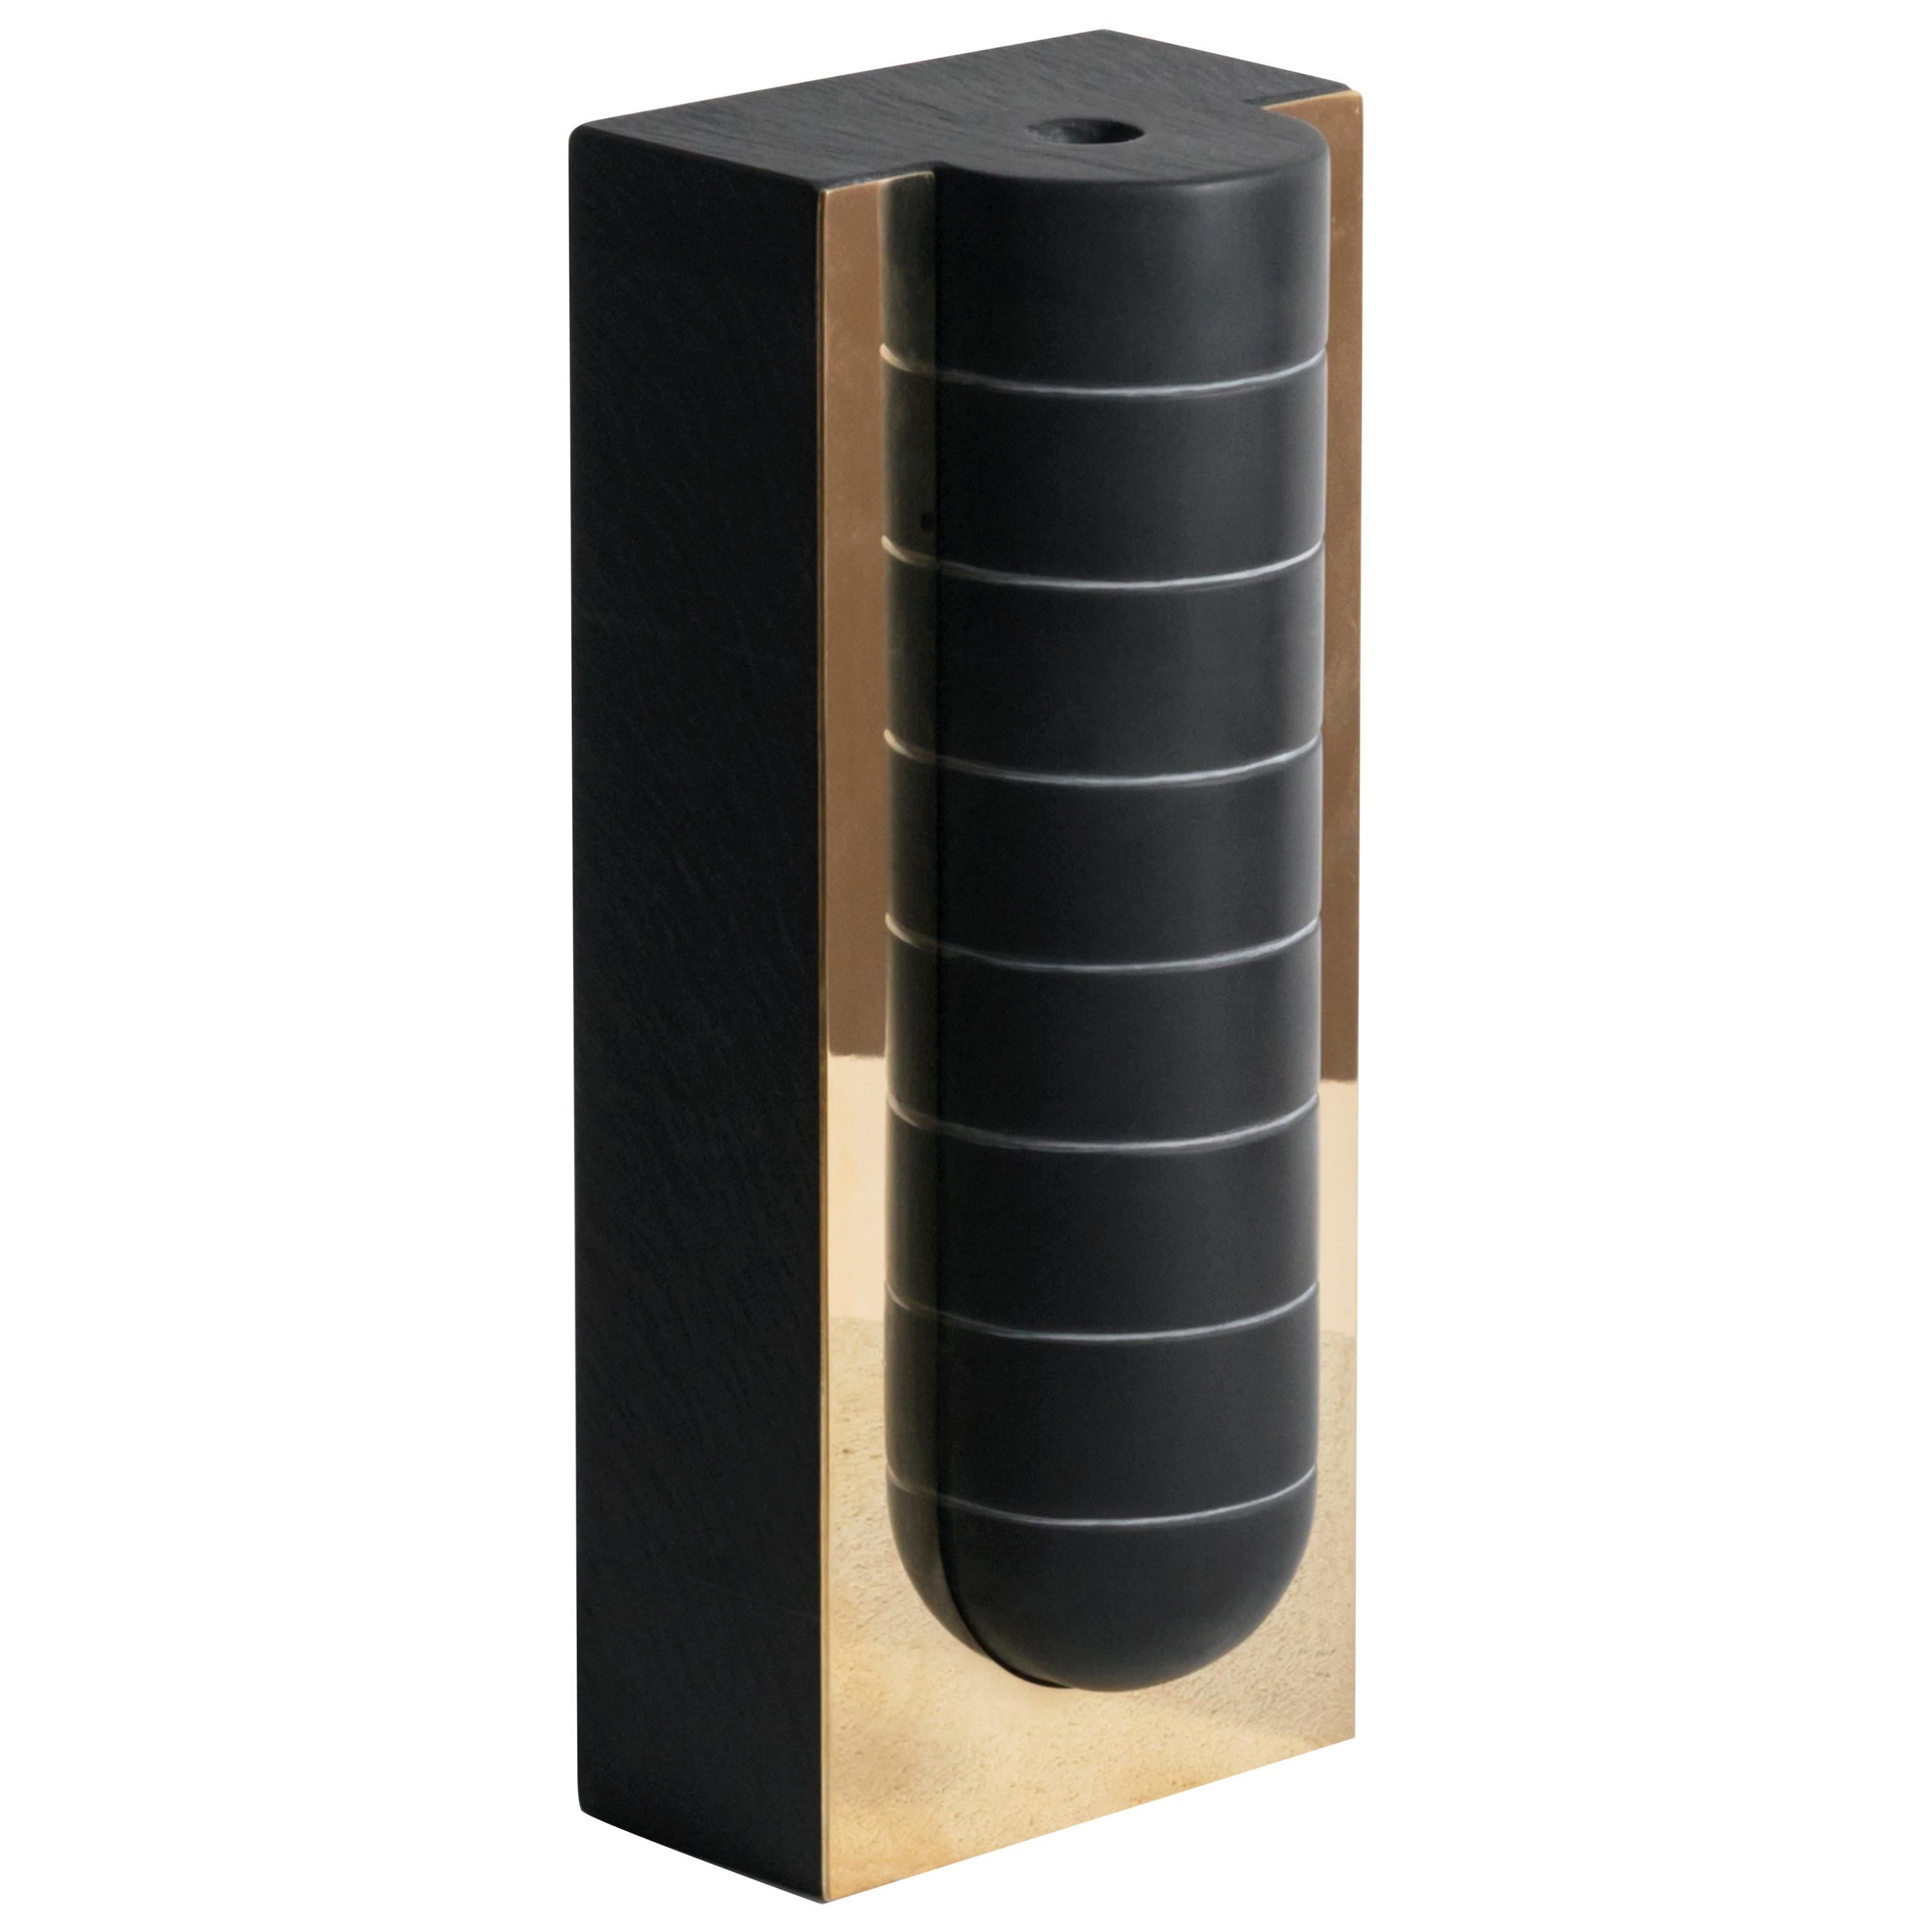 Cavi N.2 Vase in Lavagna Stone/Ardesia and Polished Brass, Limited Edition For Sale